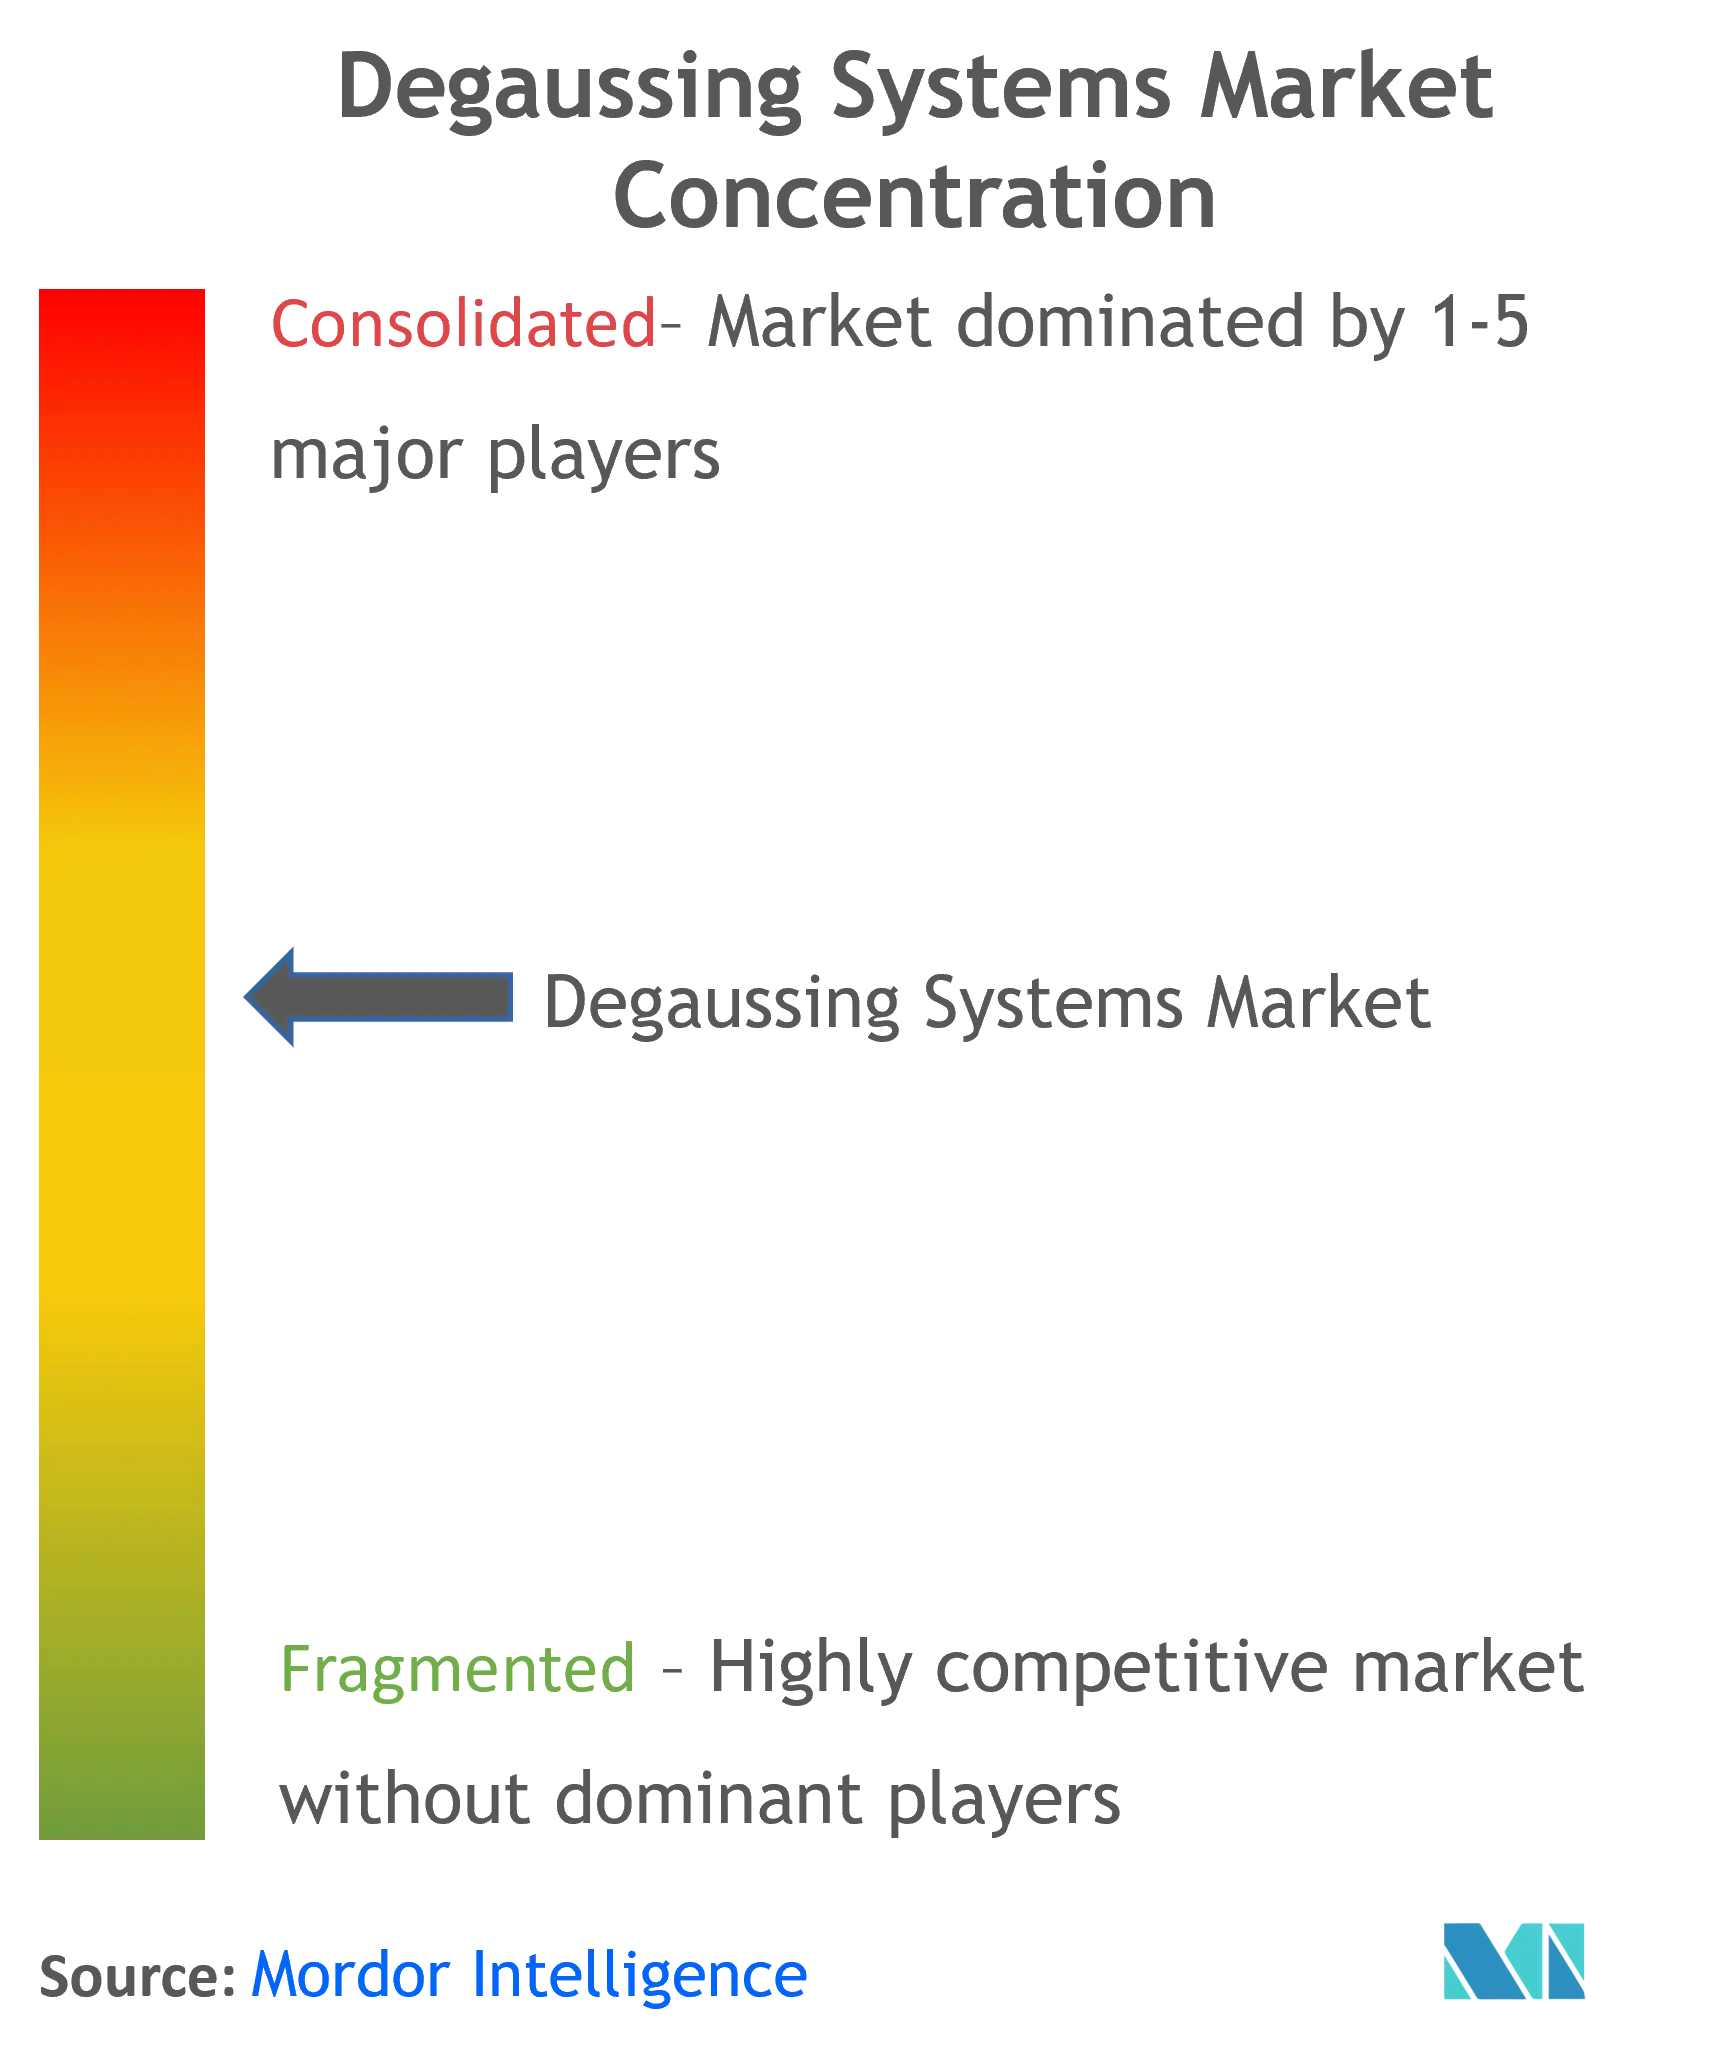 Degaussing Systems Market Concentration